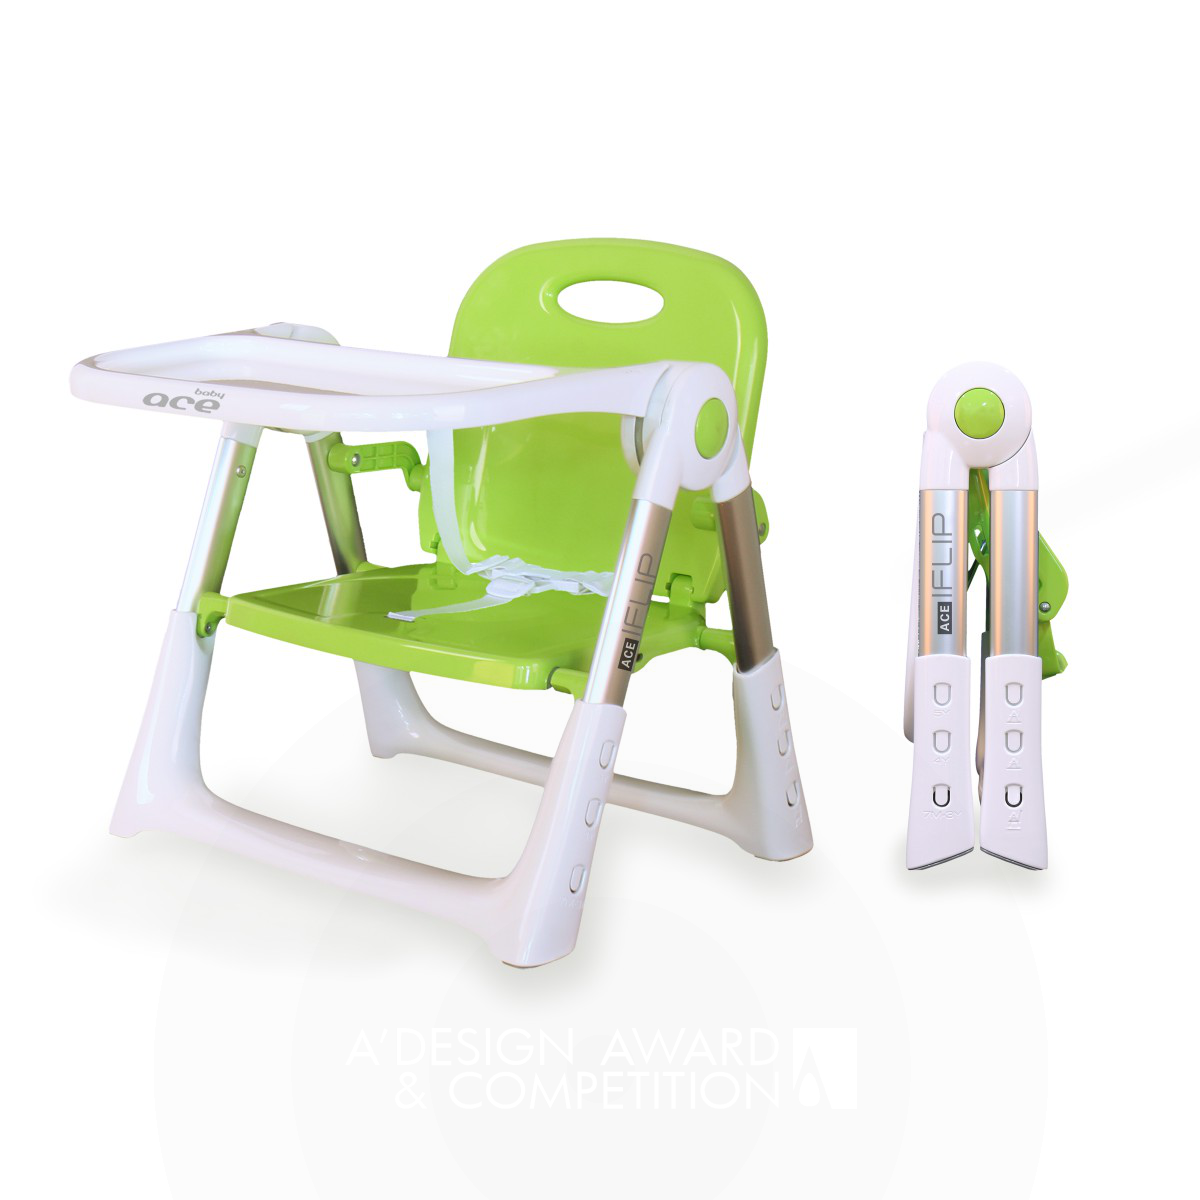 Ace Iflip Multi Function Dining Chair by ChinI Lai, KungYin Lai and ChungSheng Chen Iron Baby, Kids' and Children's Products Design Award Winner 2021 